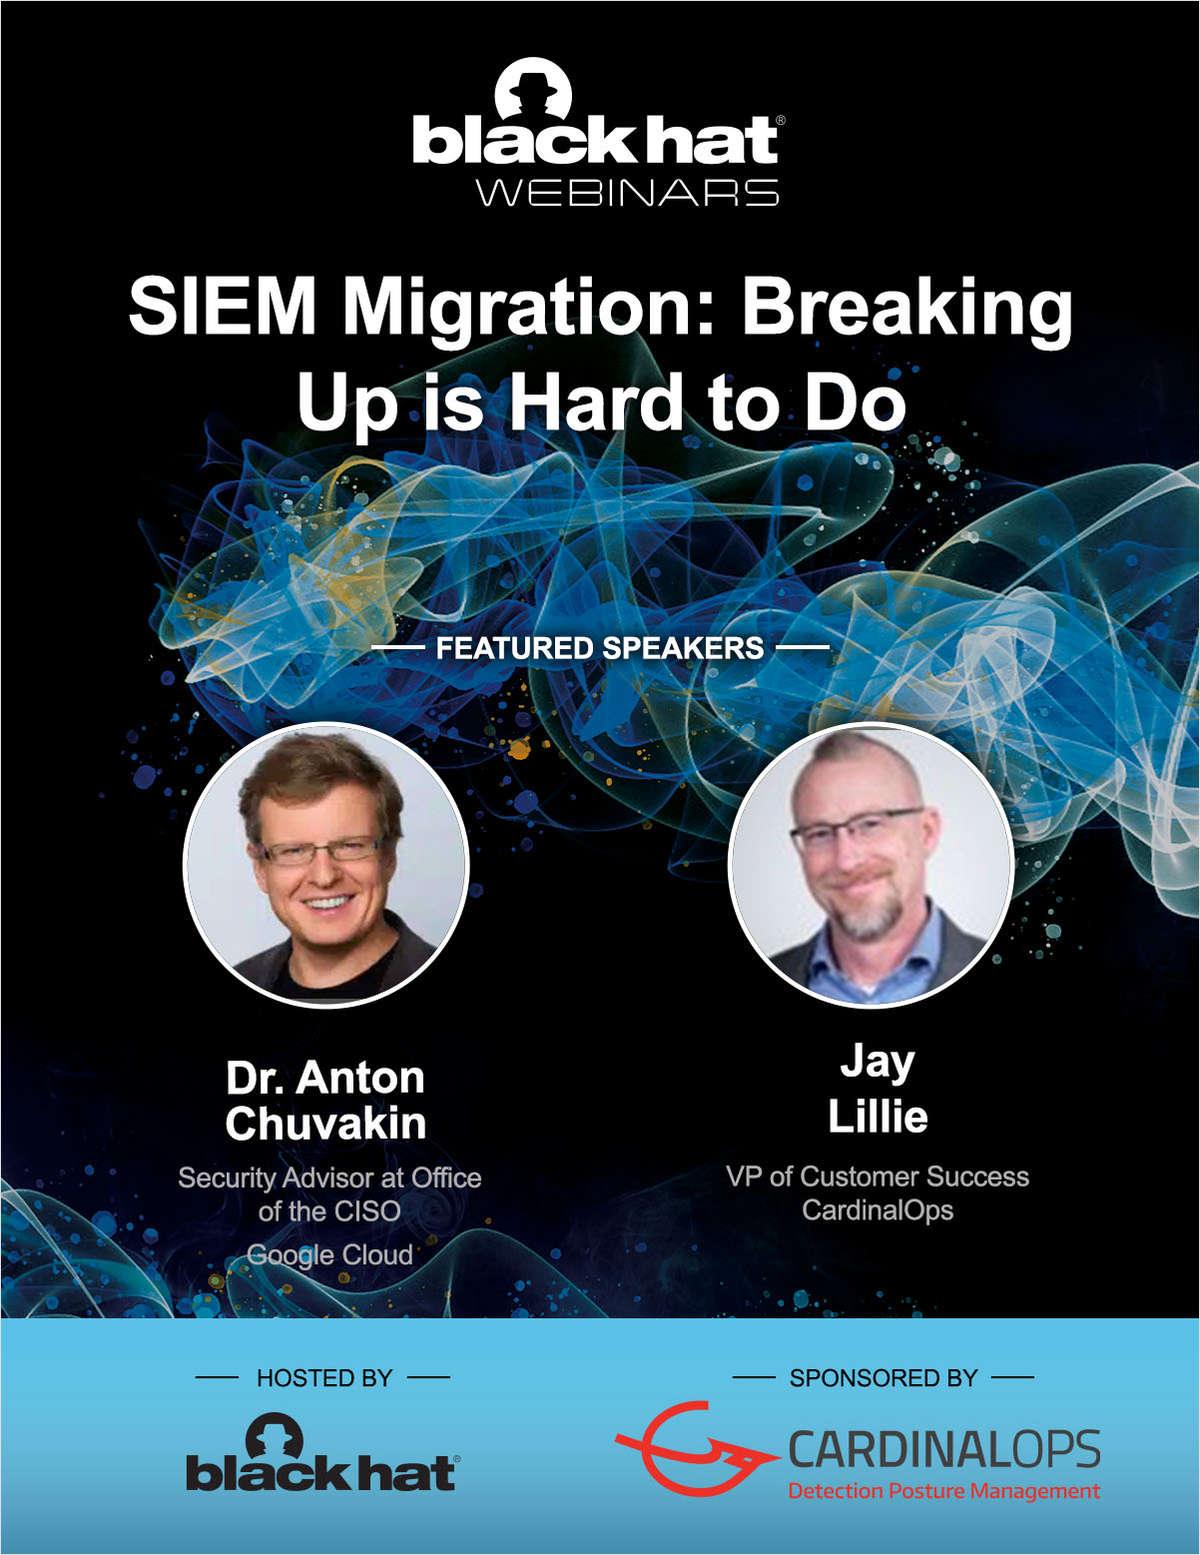 SIEM Migration: Breaking Up is Hard to Do